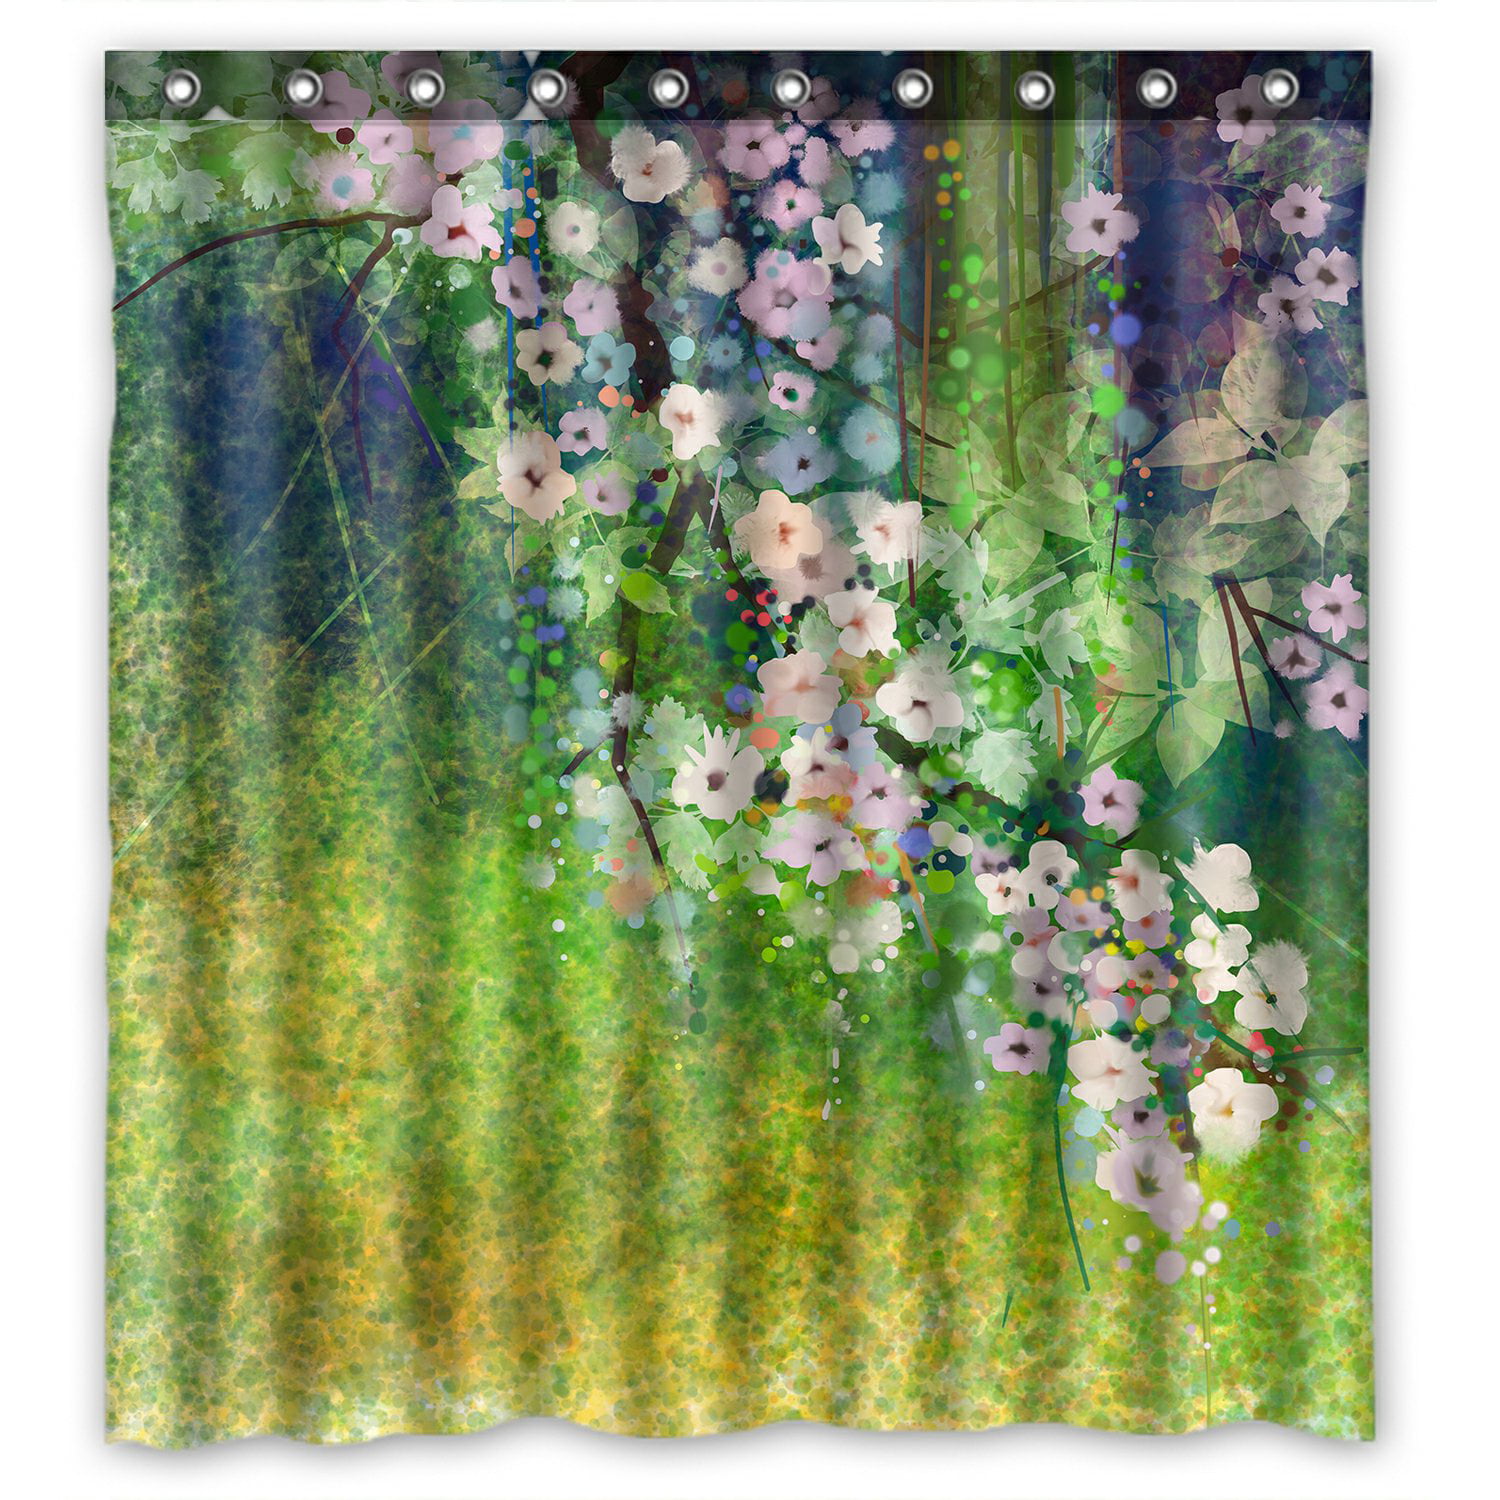 PHFZK Abstract Floral Design Shower Curtain, Watercolor Painting ...